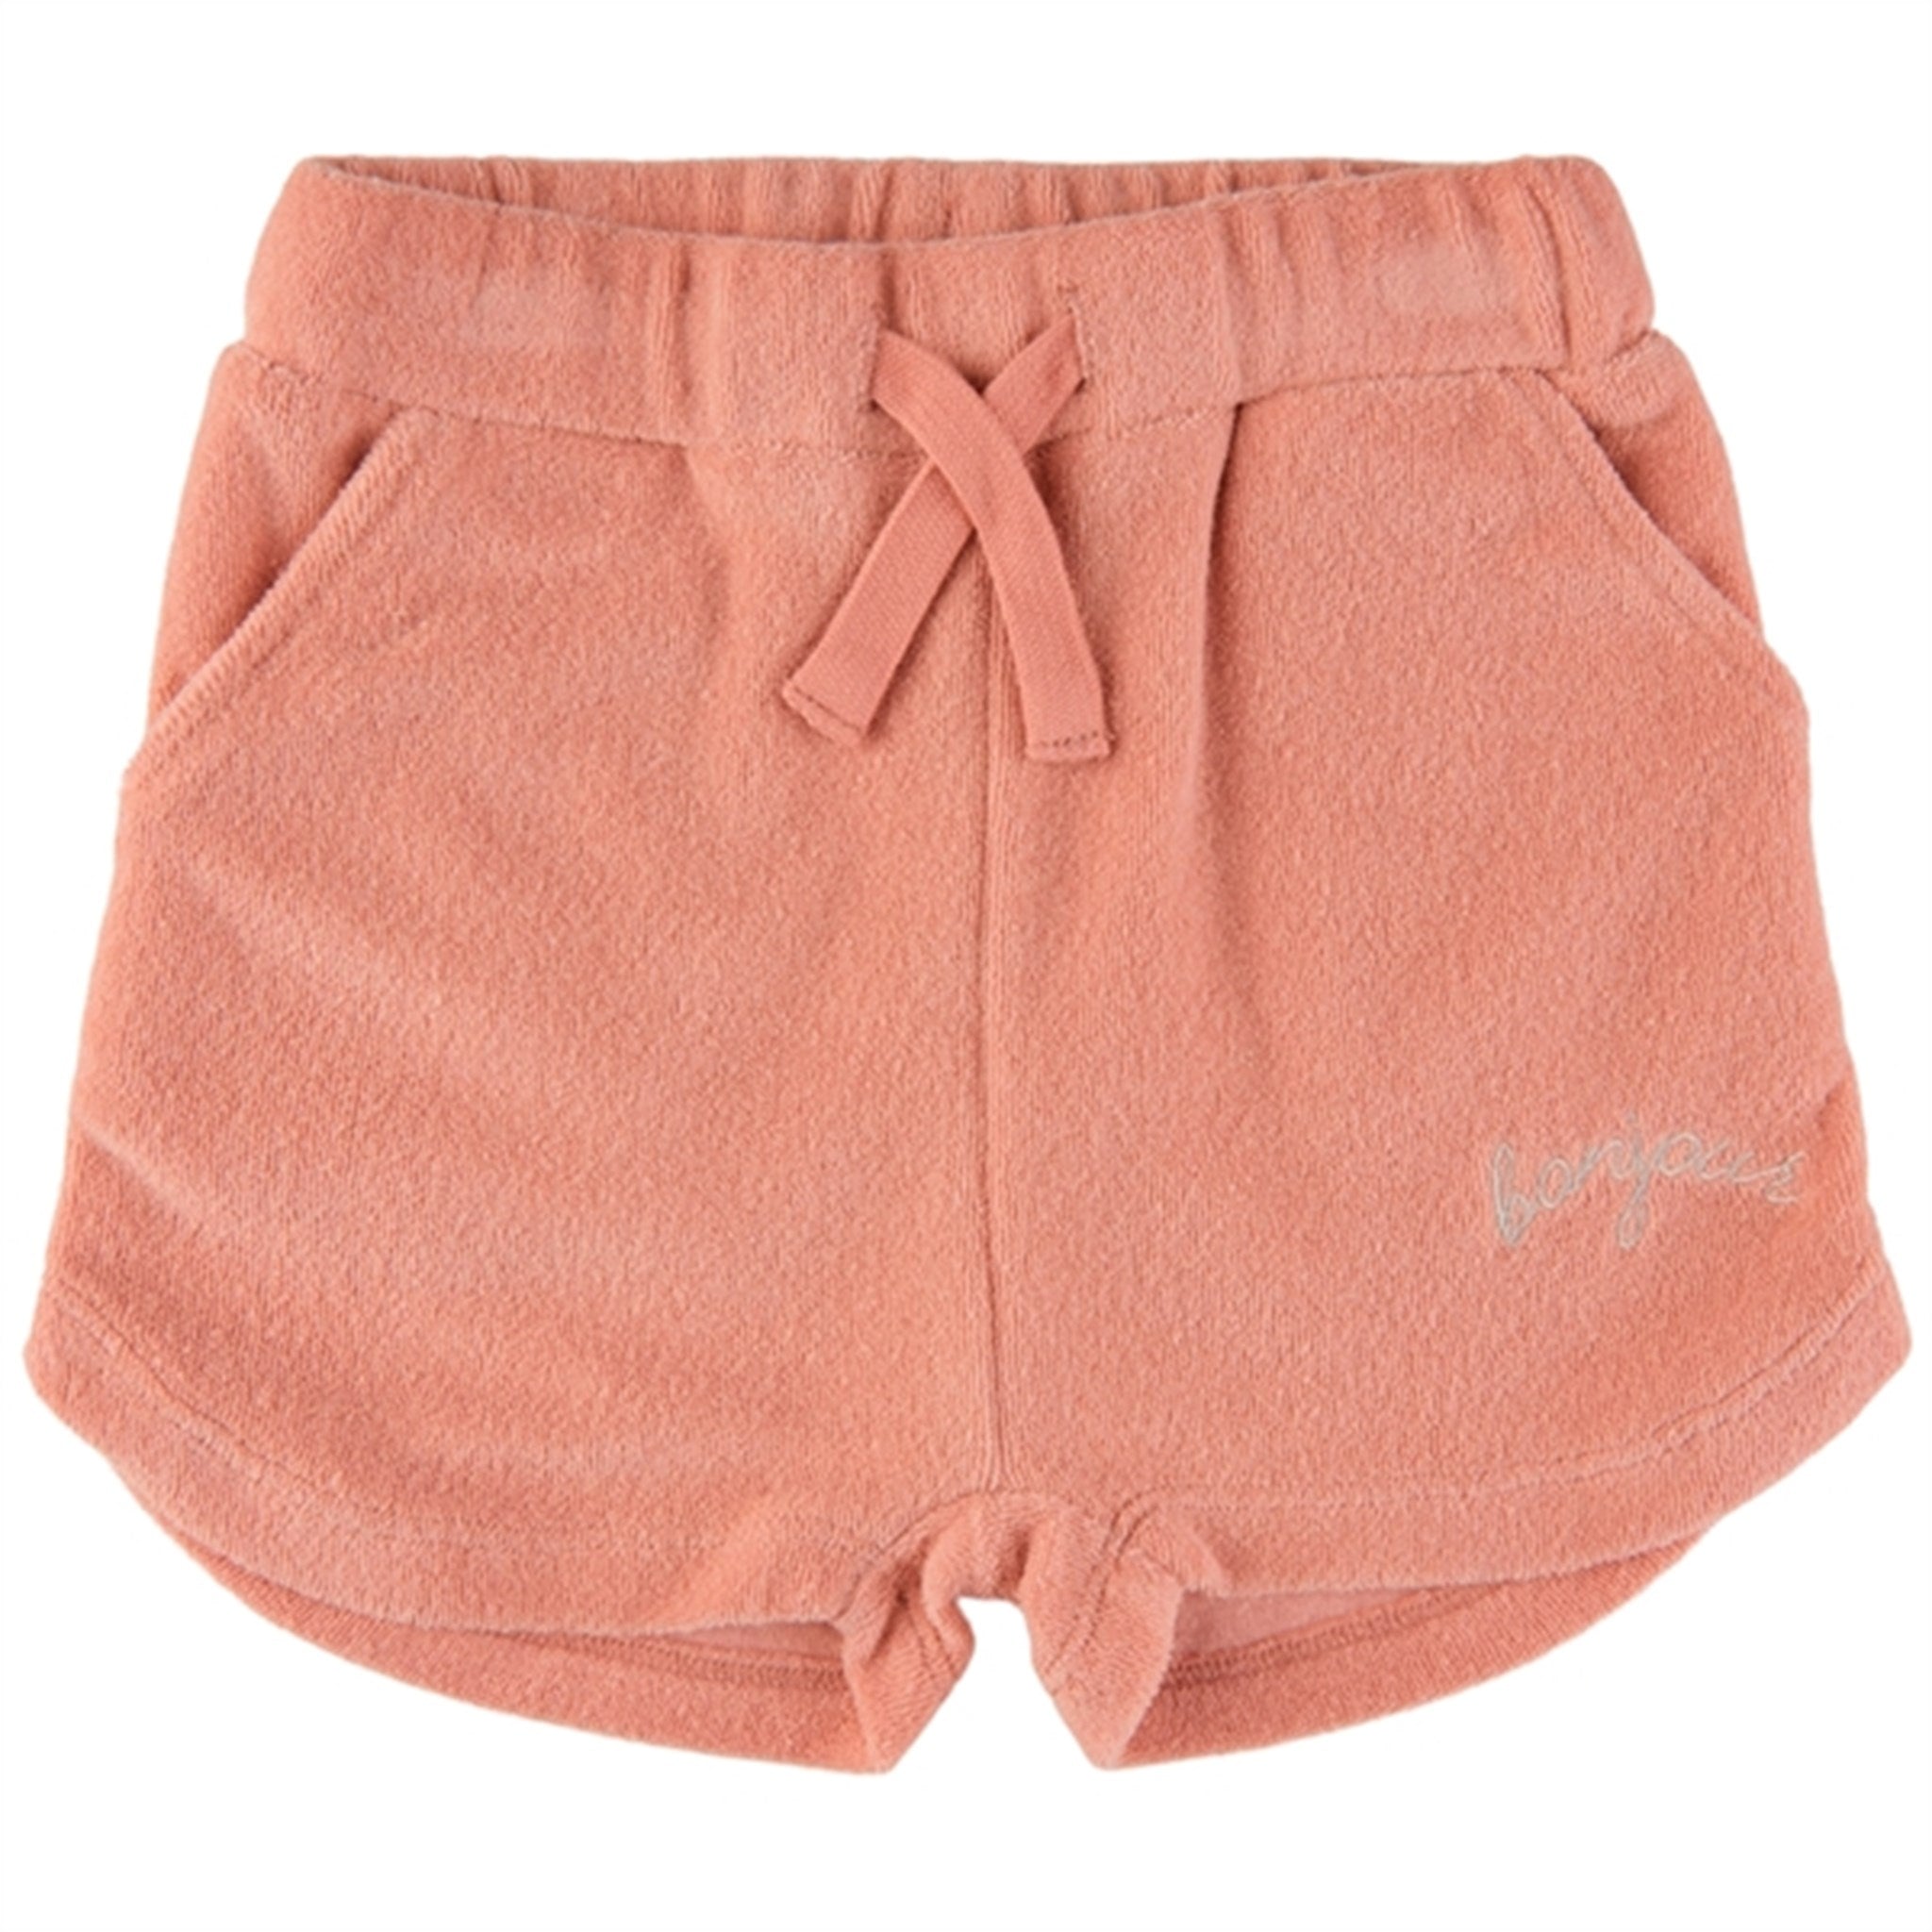 THE NEW Siblings Peach Beige Gertrud Terry Shorts